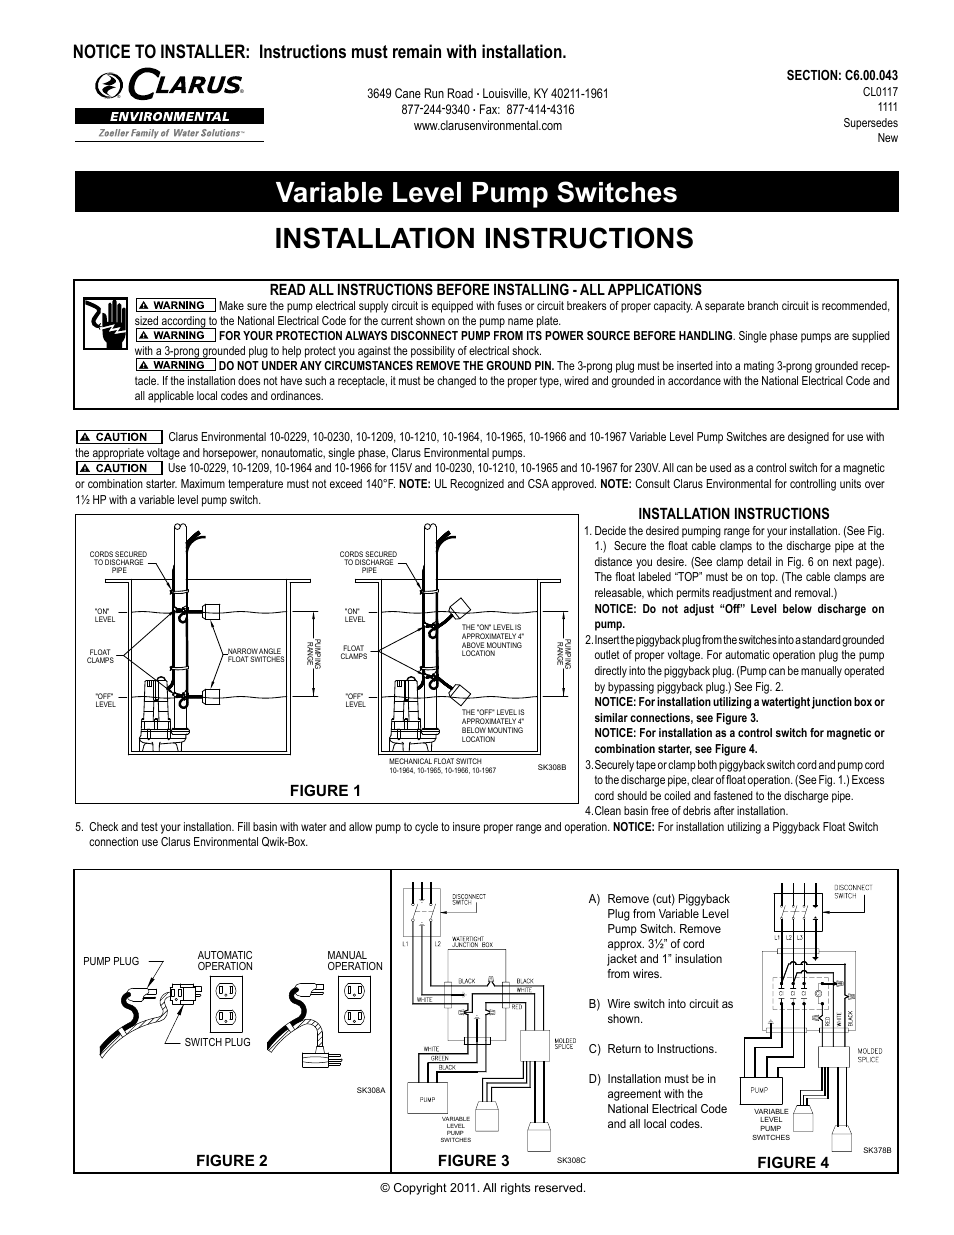 Variable Level Pump Switches